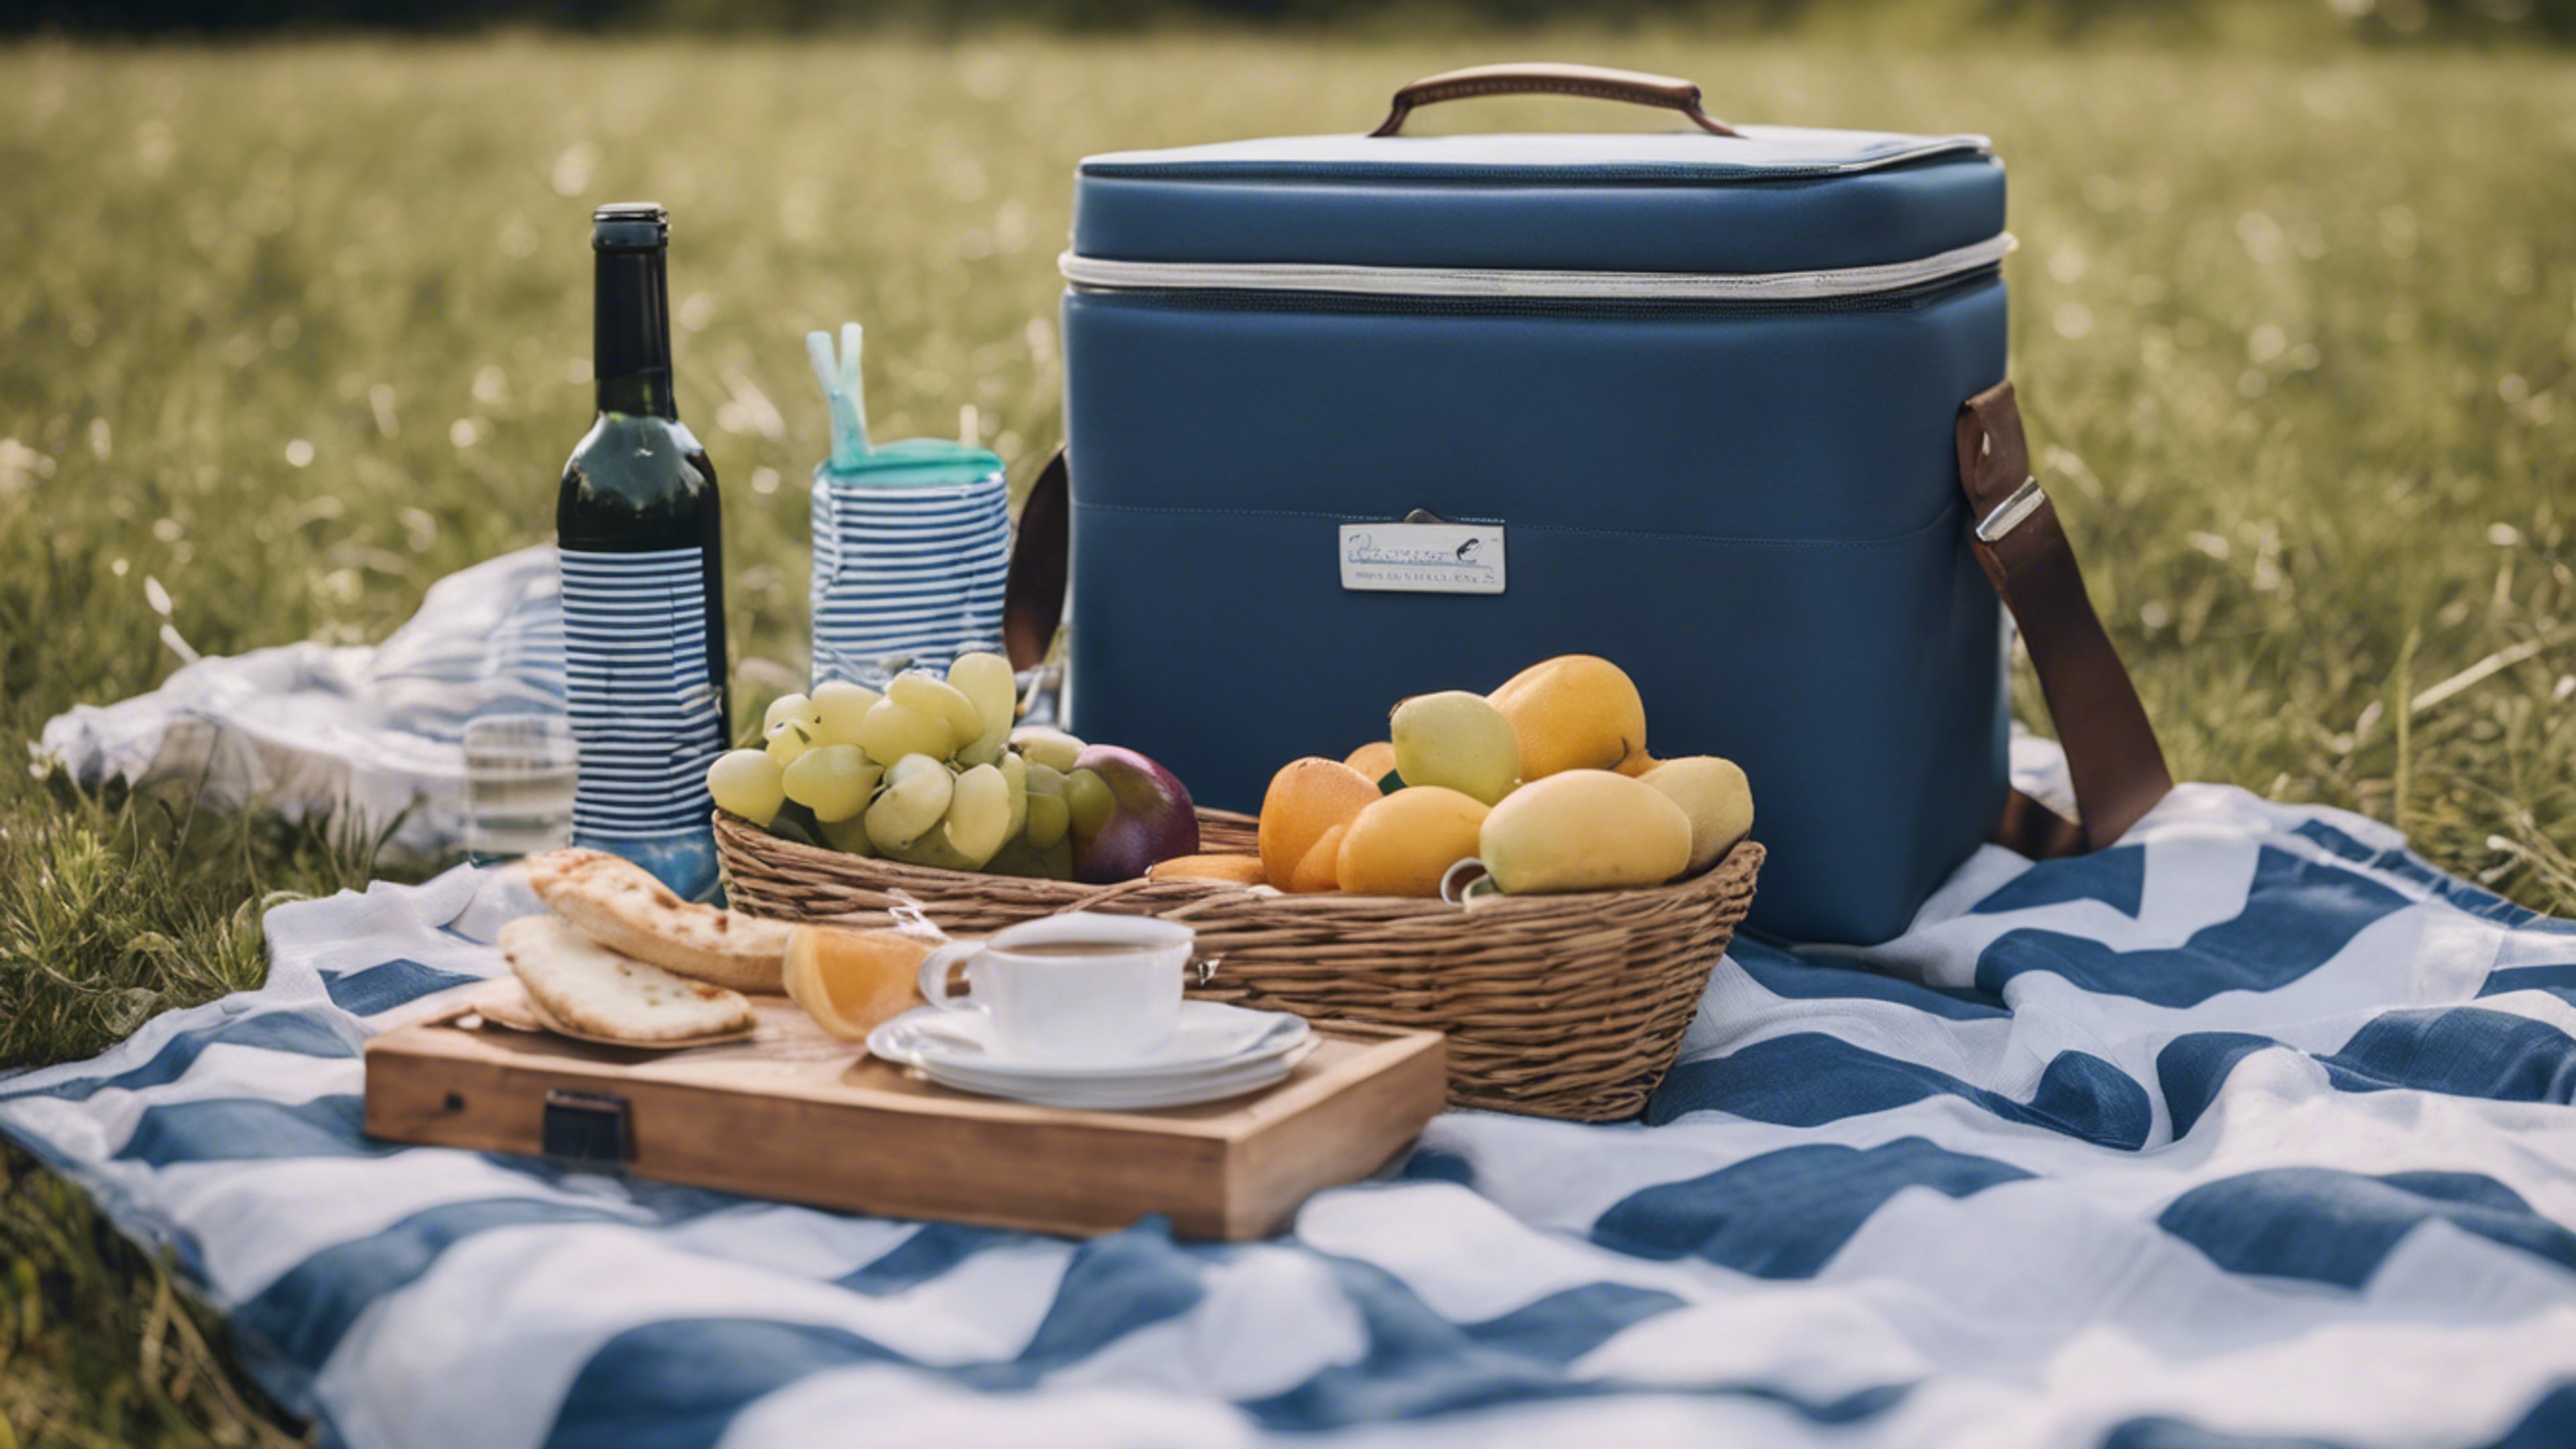 A preppy picnic setup in a grassy meadow, featuring a blue and white striped picnic blanket and matching cooler. Fondo de pantalla[2c3aa7a20c924d6f9450]